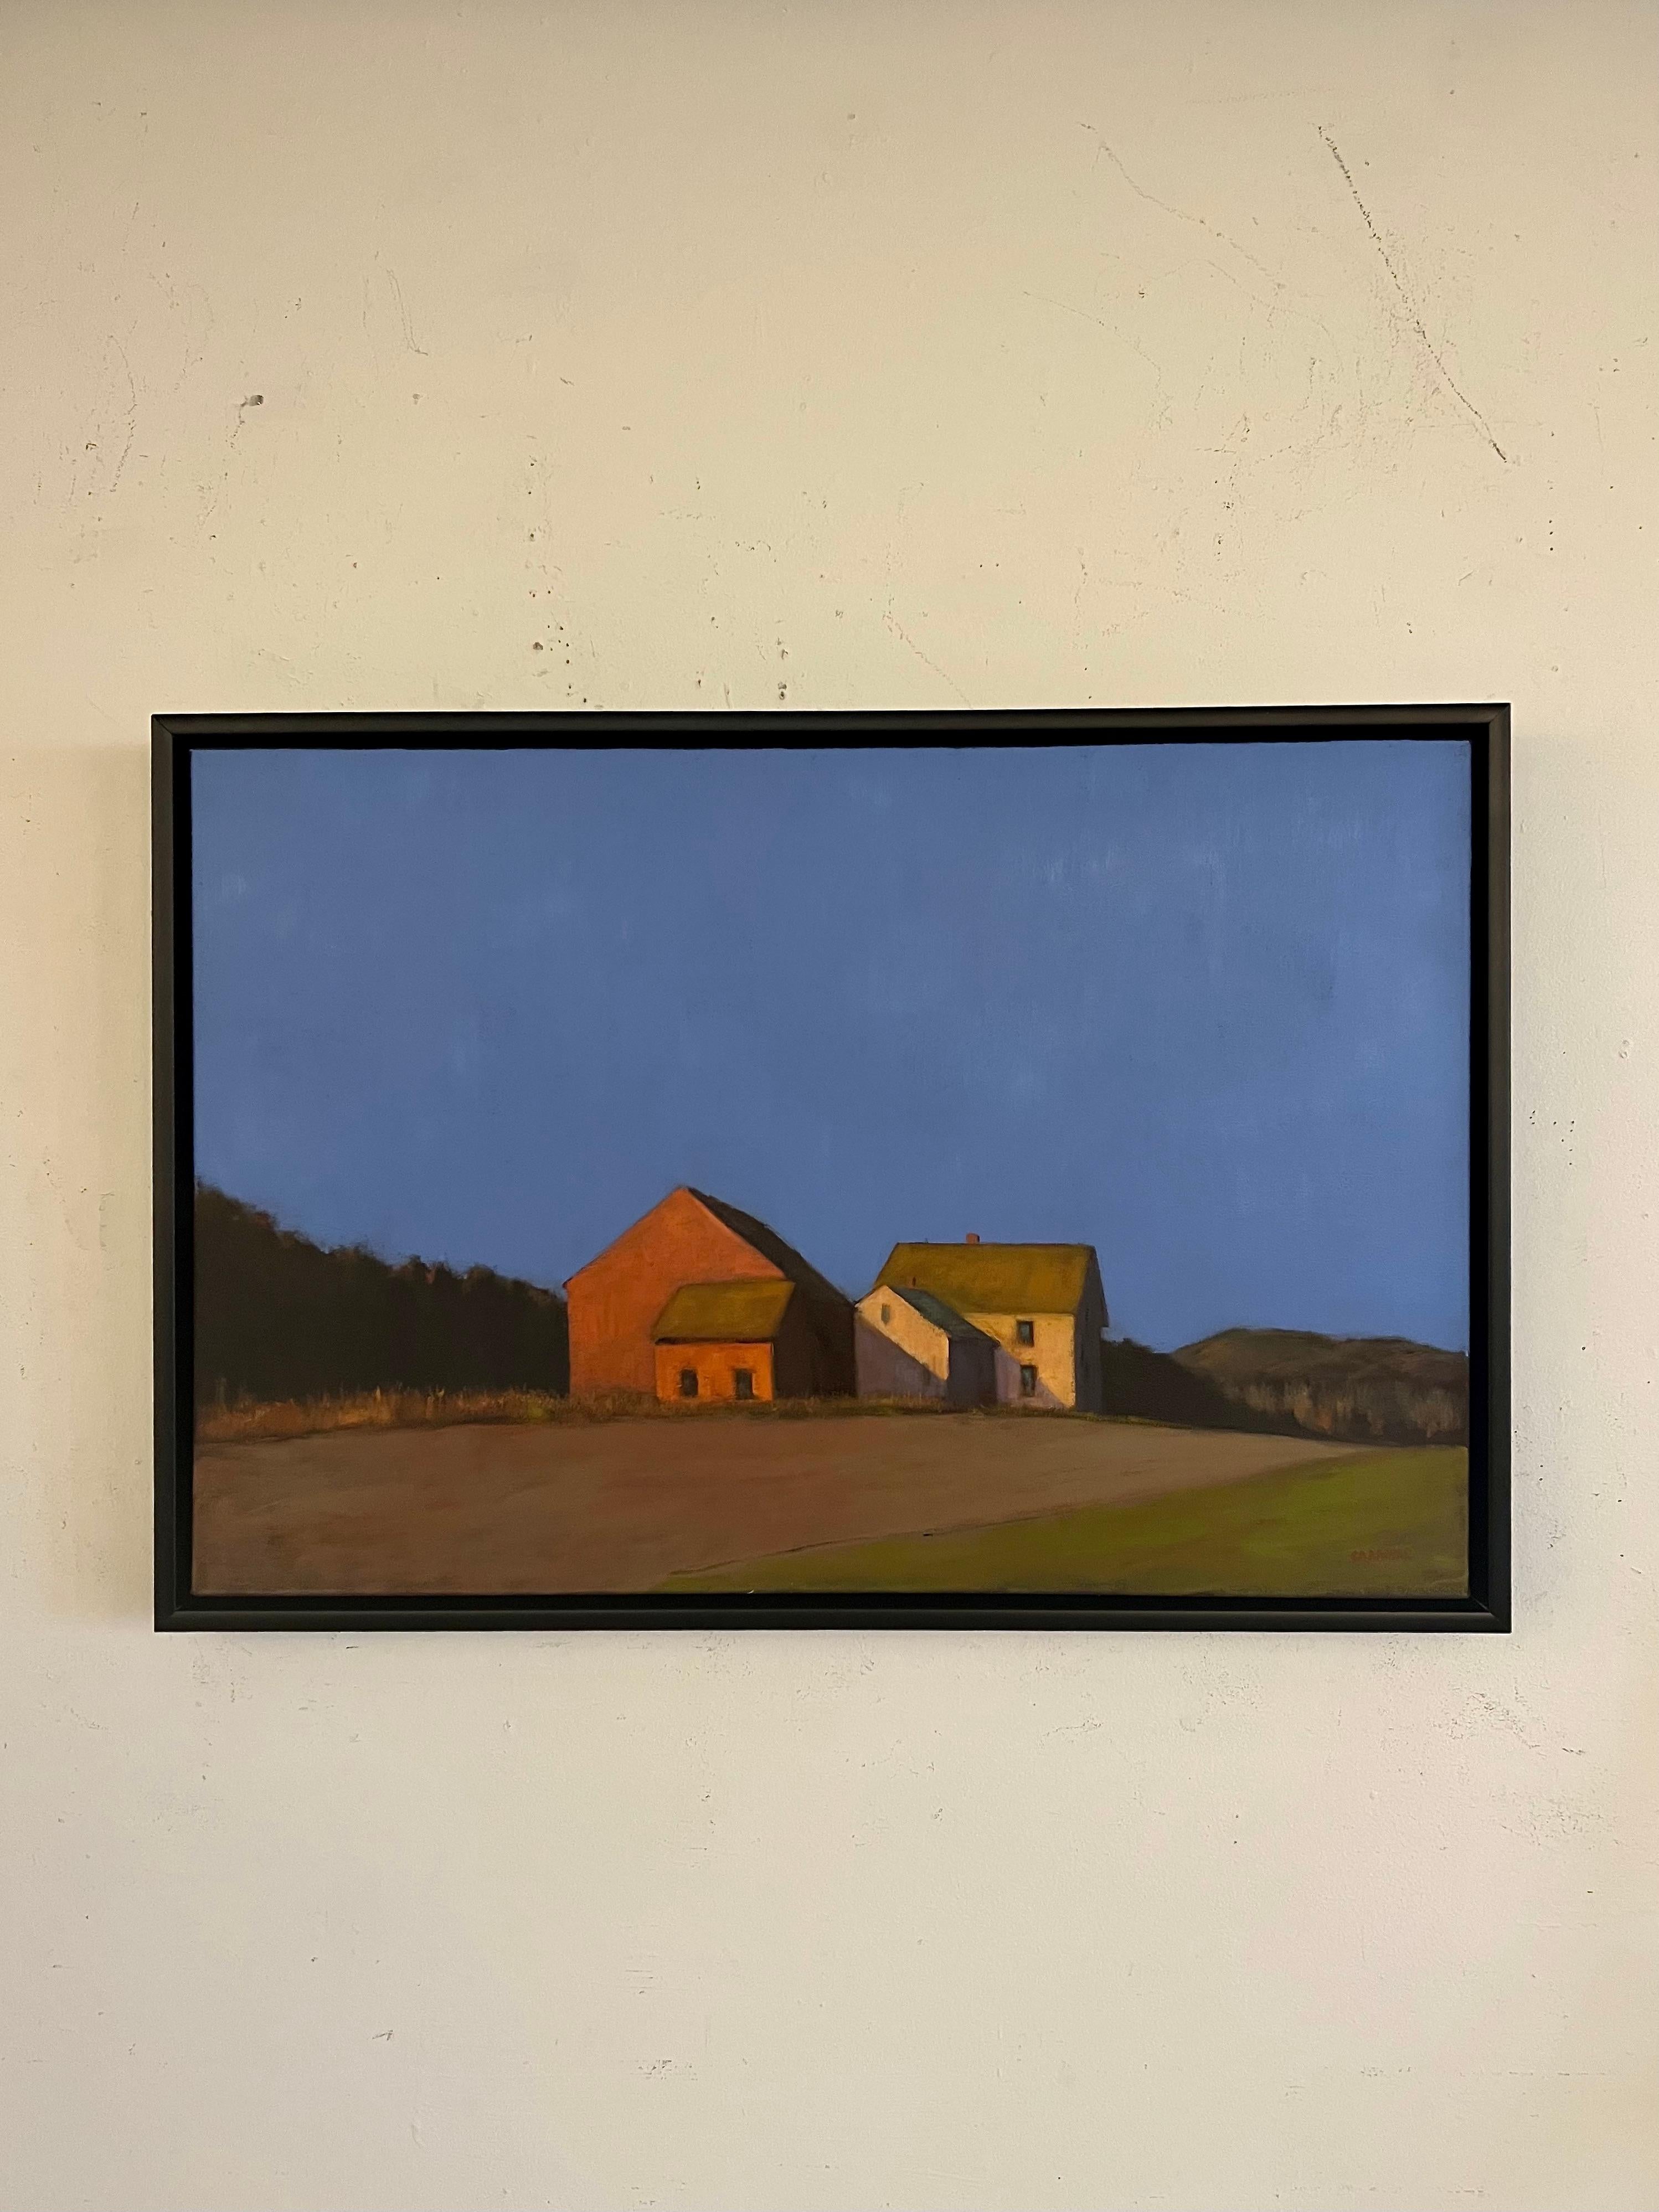 Vermont Morning - Painting by Robert Cardinal